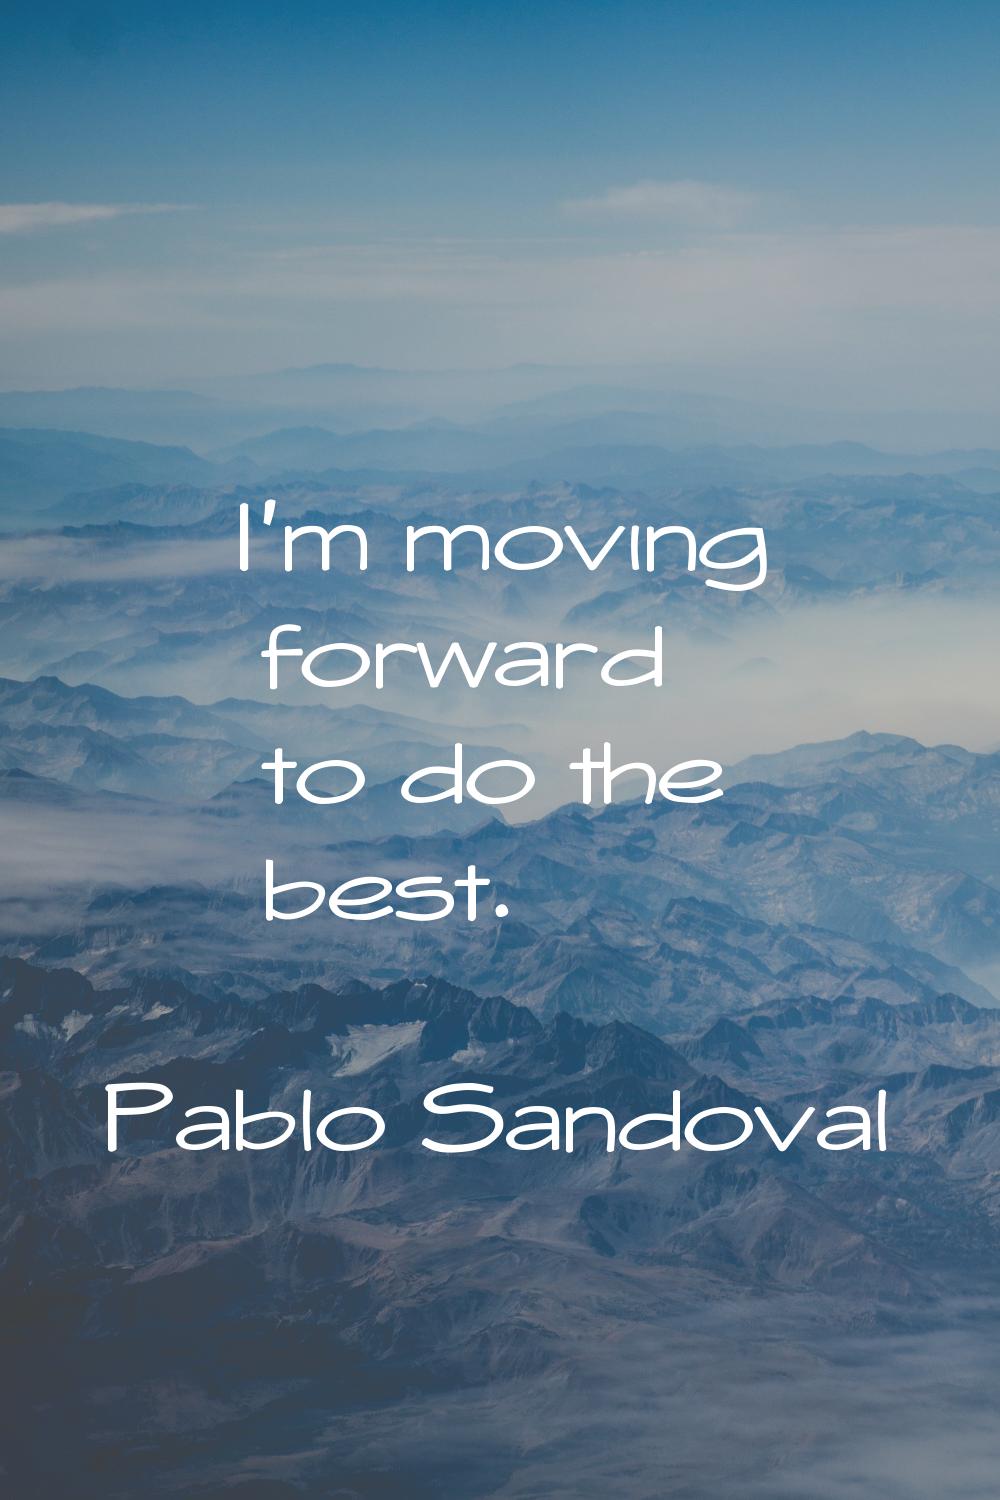 I'm moving forward to do the best.